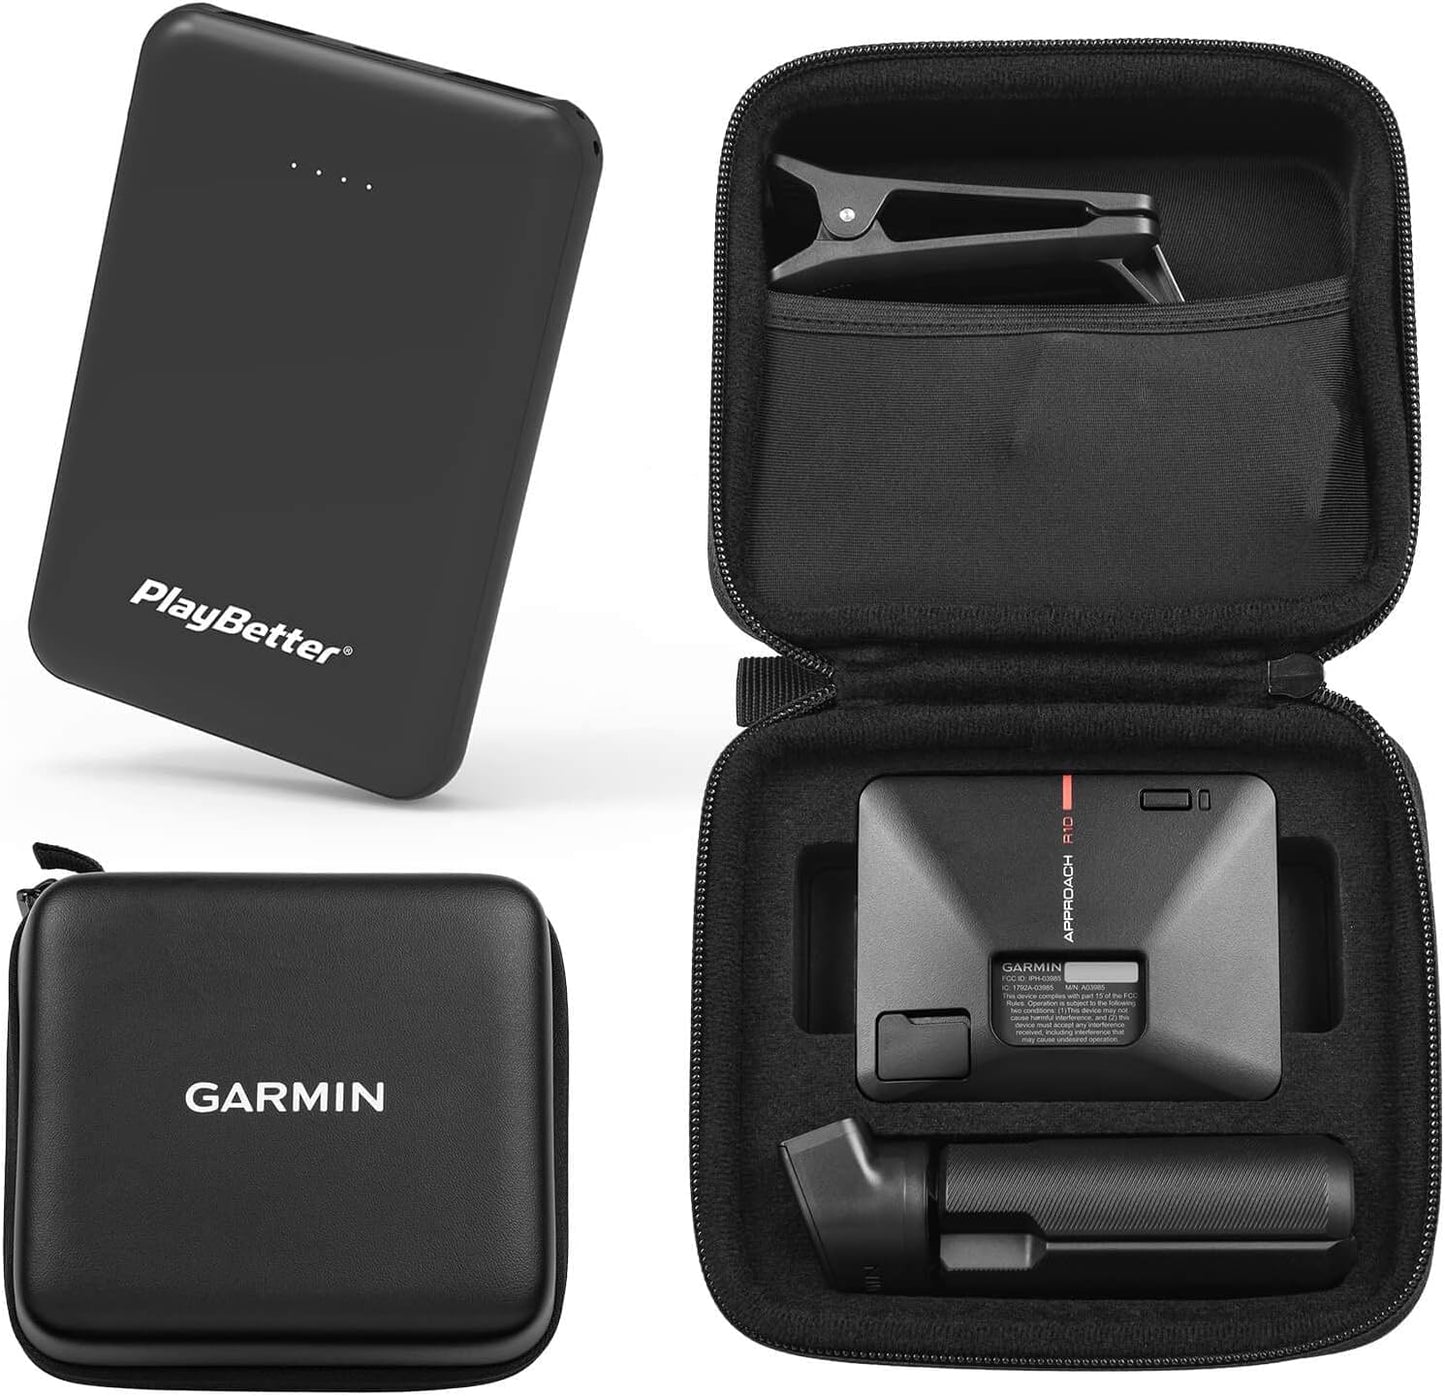 Garmin Approach R10 Portable Golf Launch Monitor & Simulator Bundle - Great for Home, Outdoor & Indoor, Projector Compatible - Includes  Portable Charger, Case, Tripod & Adapter